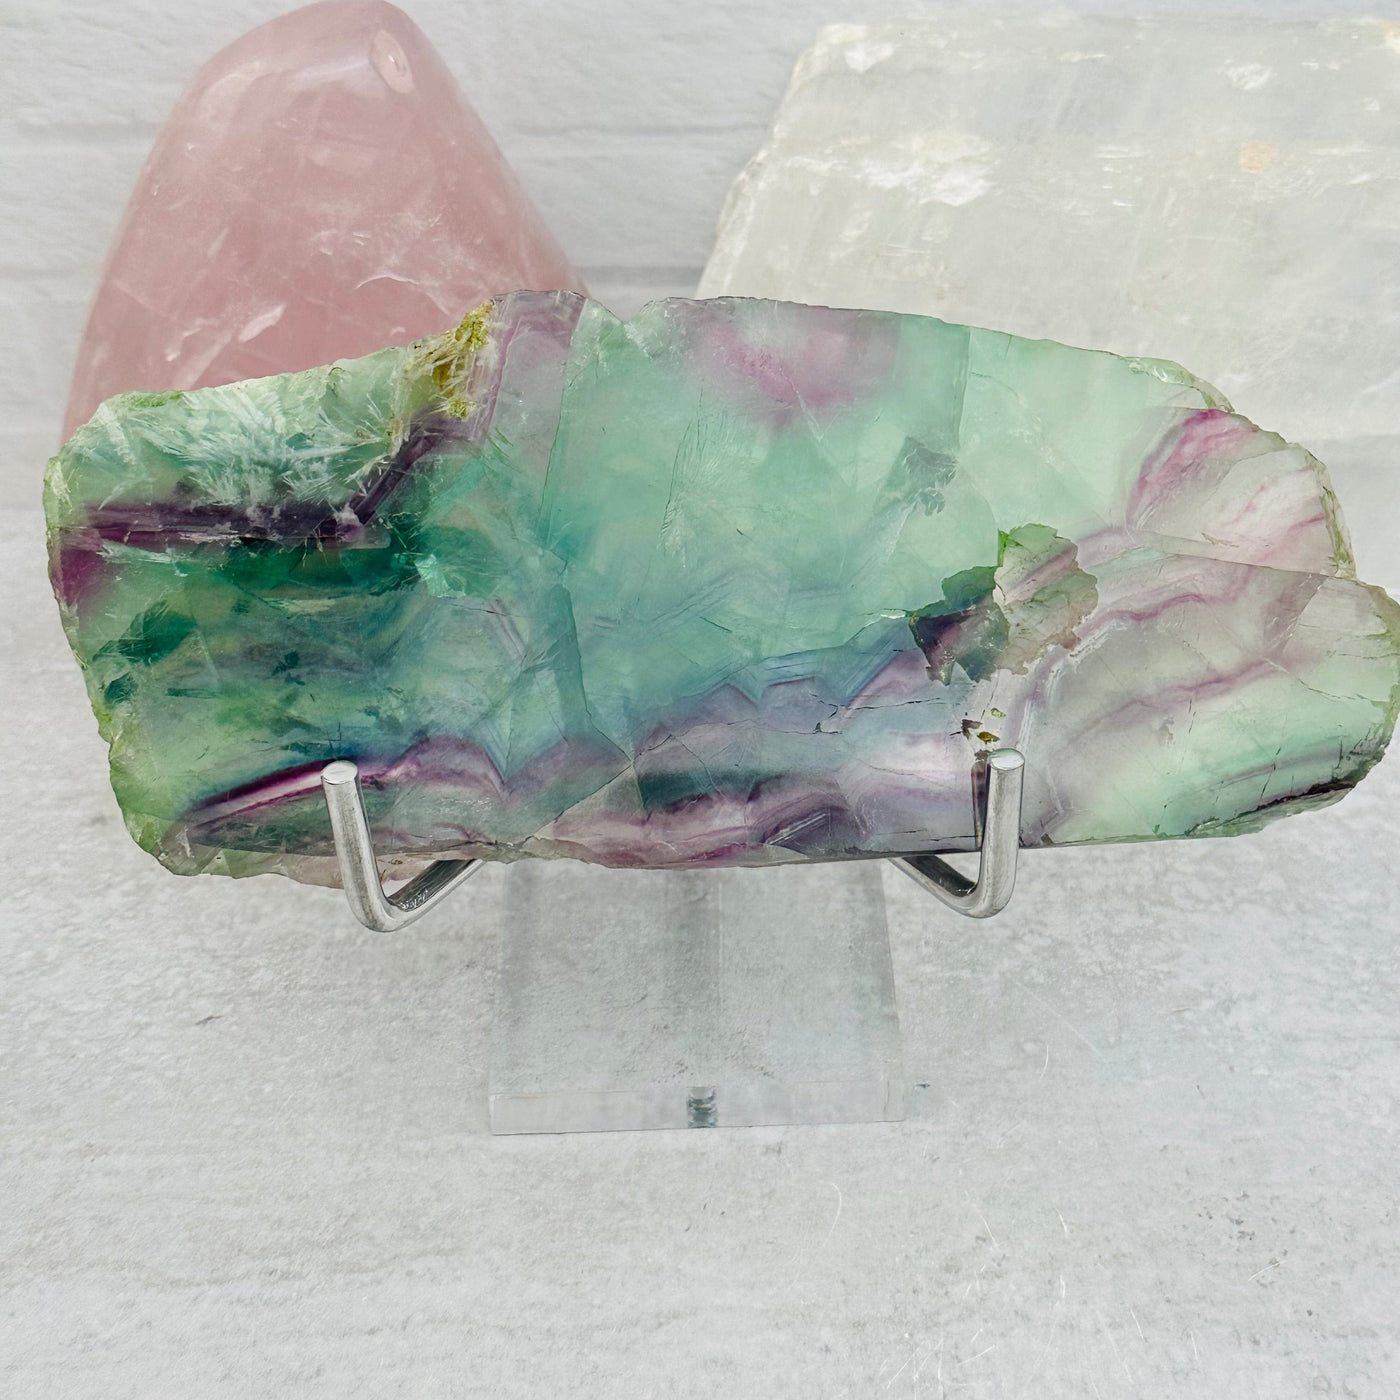 Natural Feather Fluorite Crystal Slab displayed as home decor 